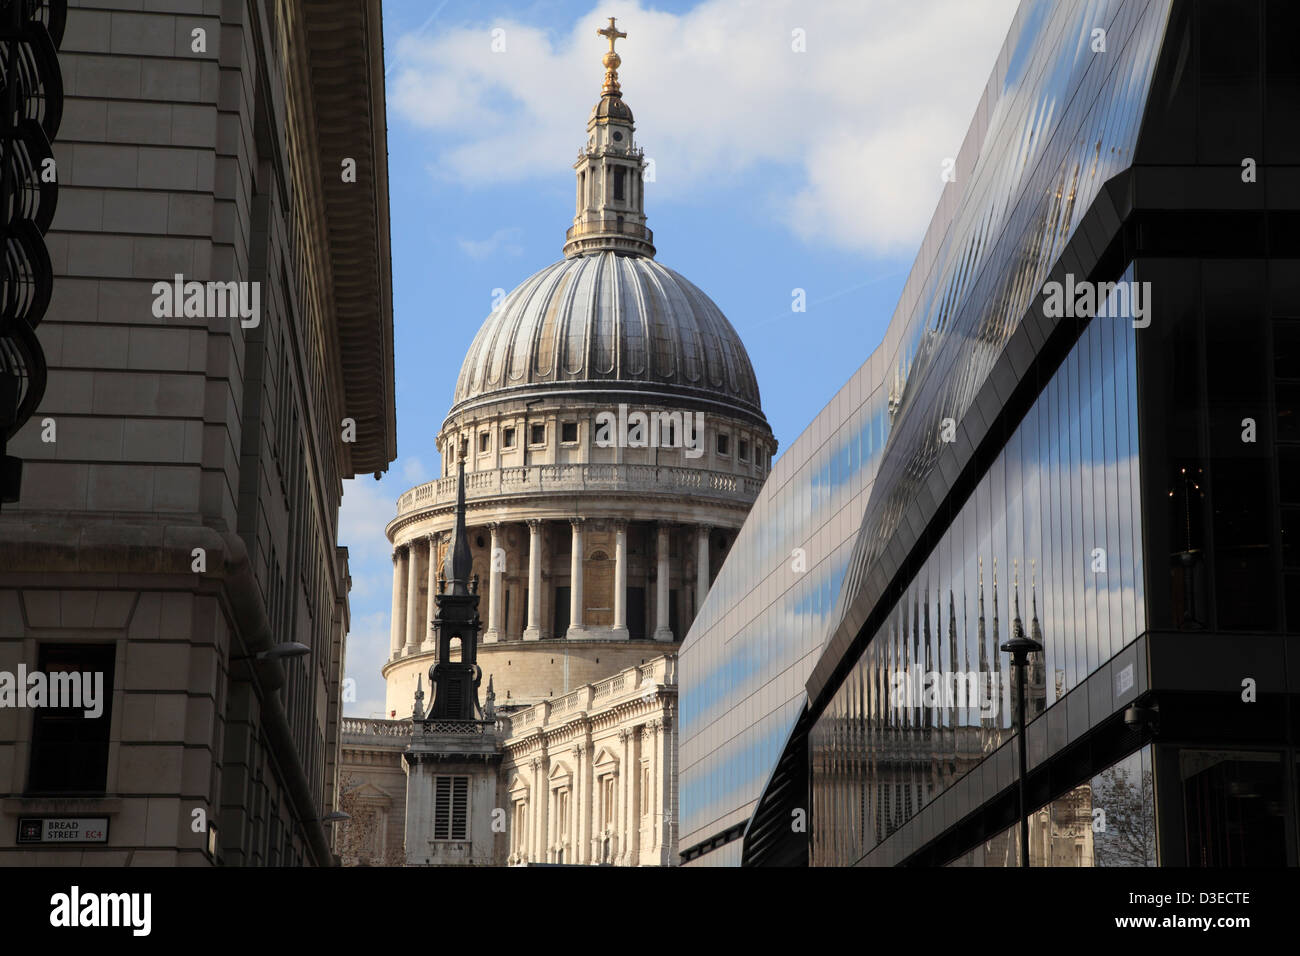 St Paul's Cathedral viewed through office buildings and One New Change shopping centre, City of London, England, UK, GB Stock Photo